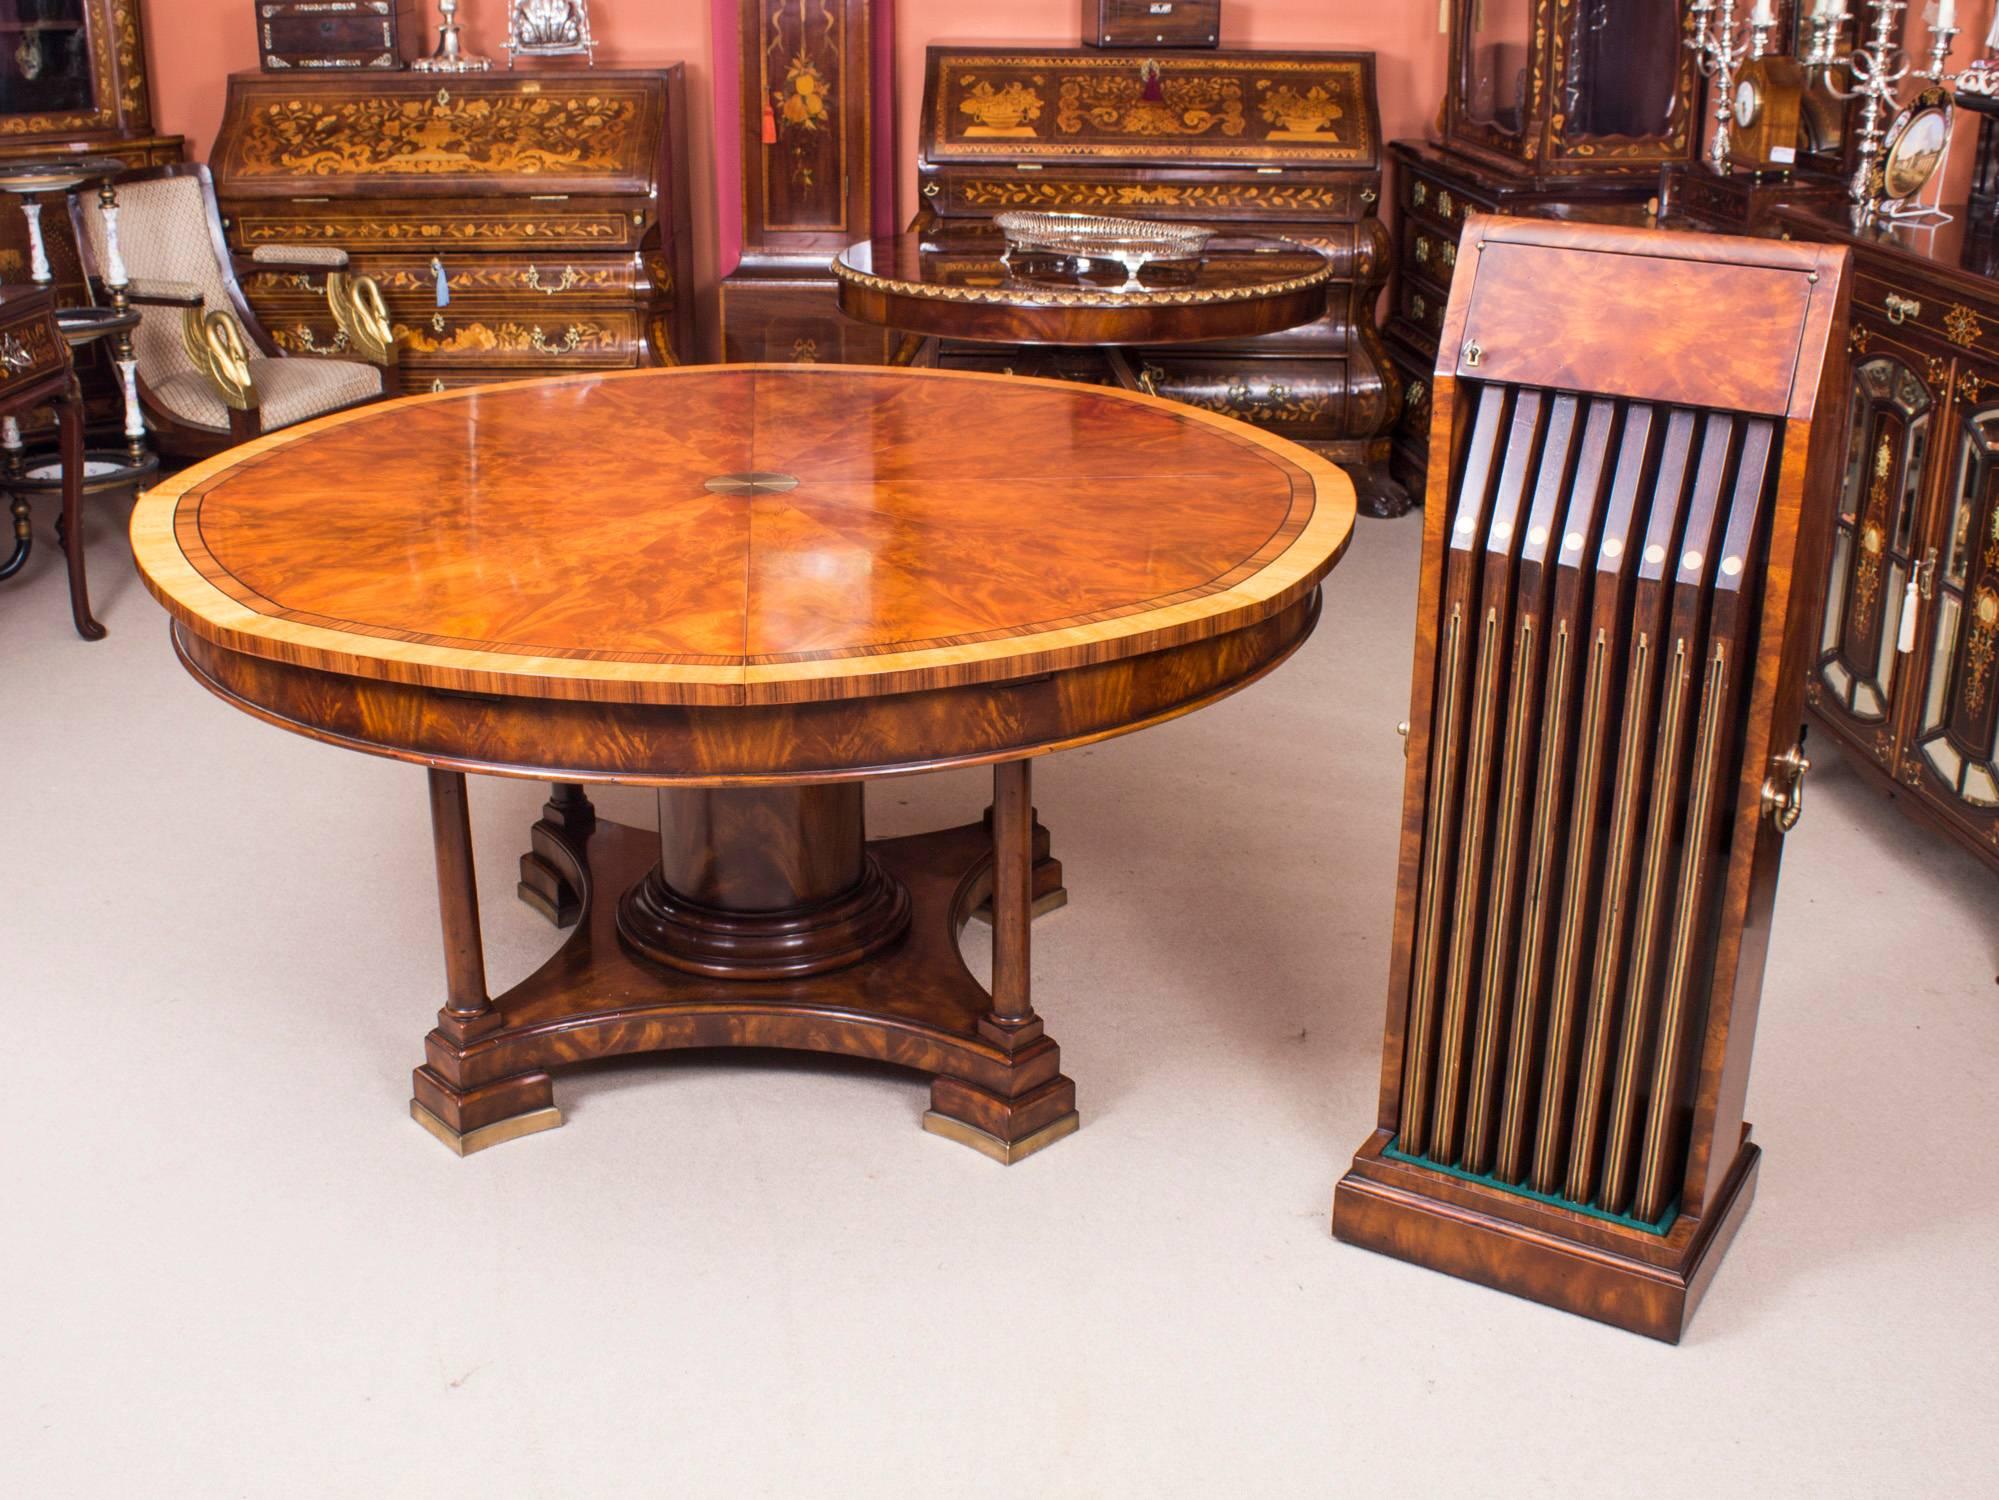 This is a beautiful Theodore Alexander replica of Robert Jupe's flame mahogany extending dining table, dating from the last quarter of the 20th century.

The brass capstan action rotating eight triangular segments to accommodate eight additional